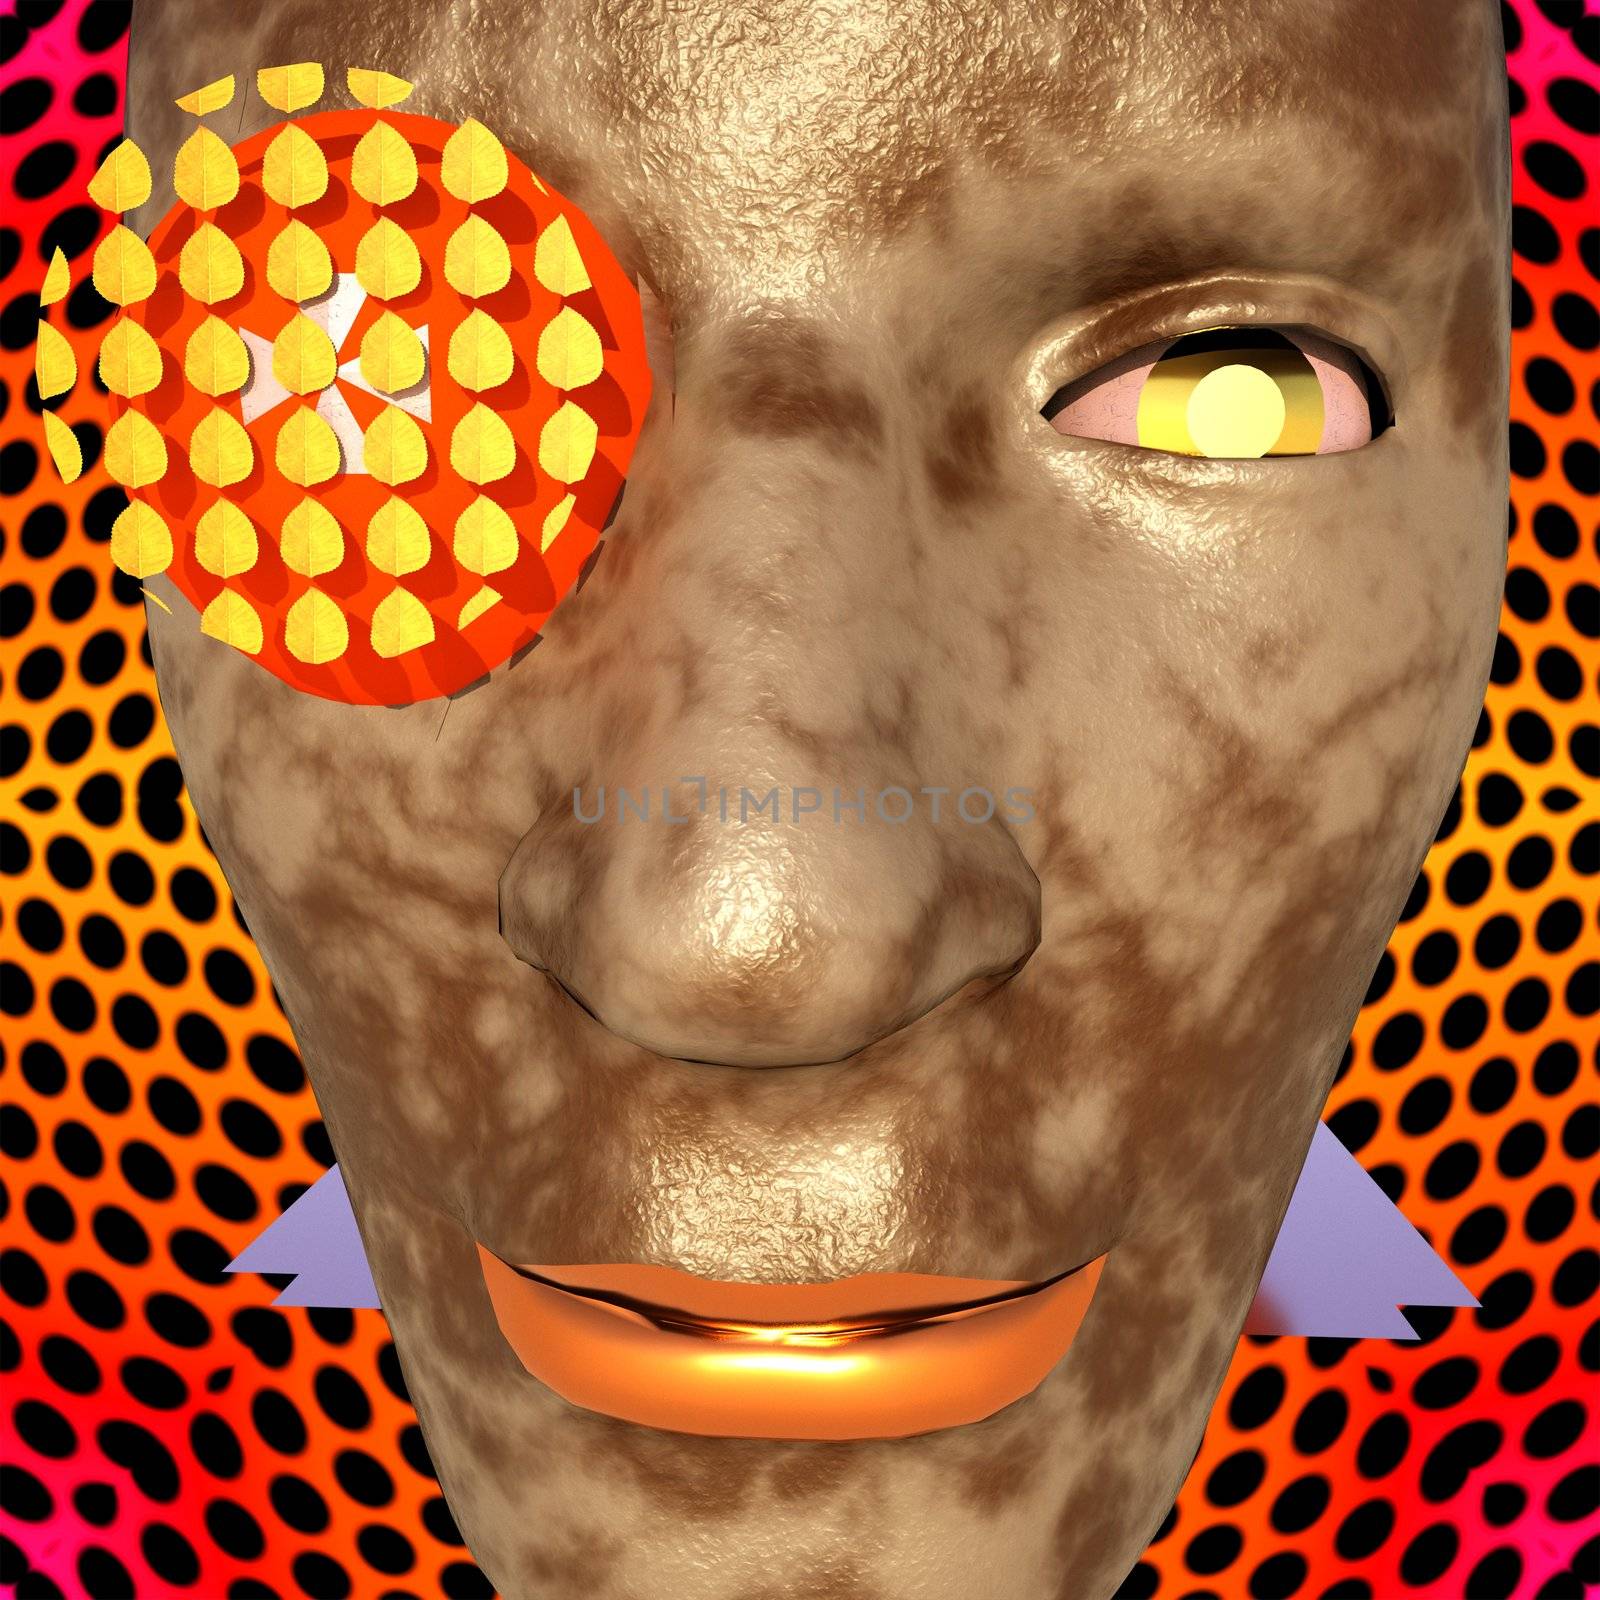 Cyborg's face close up - abstract composition